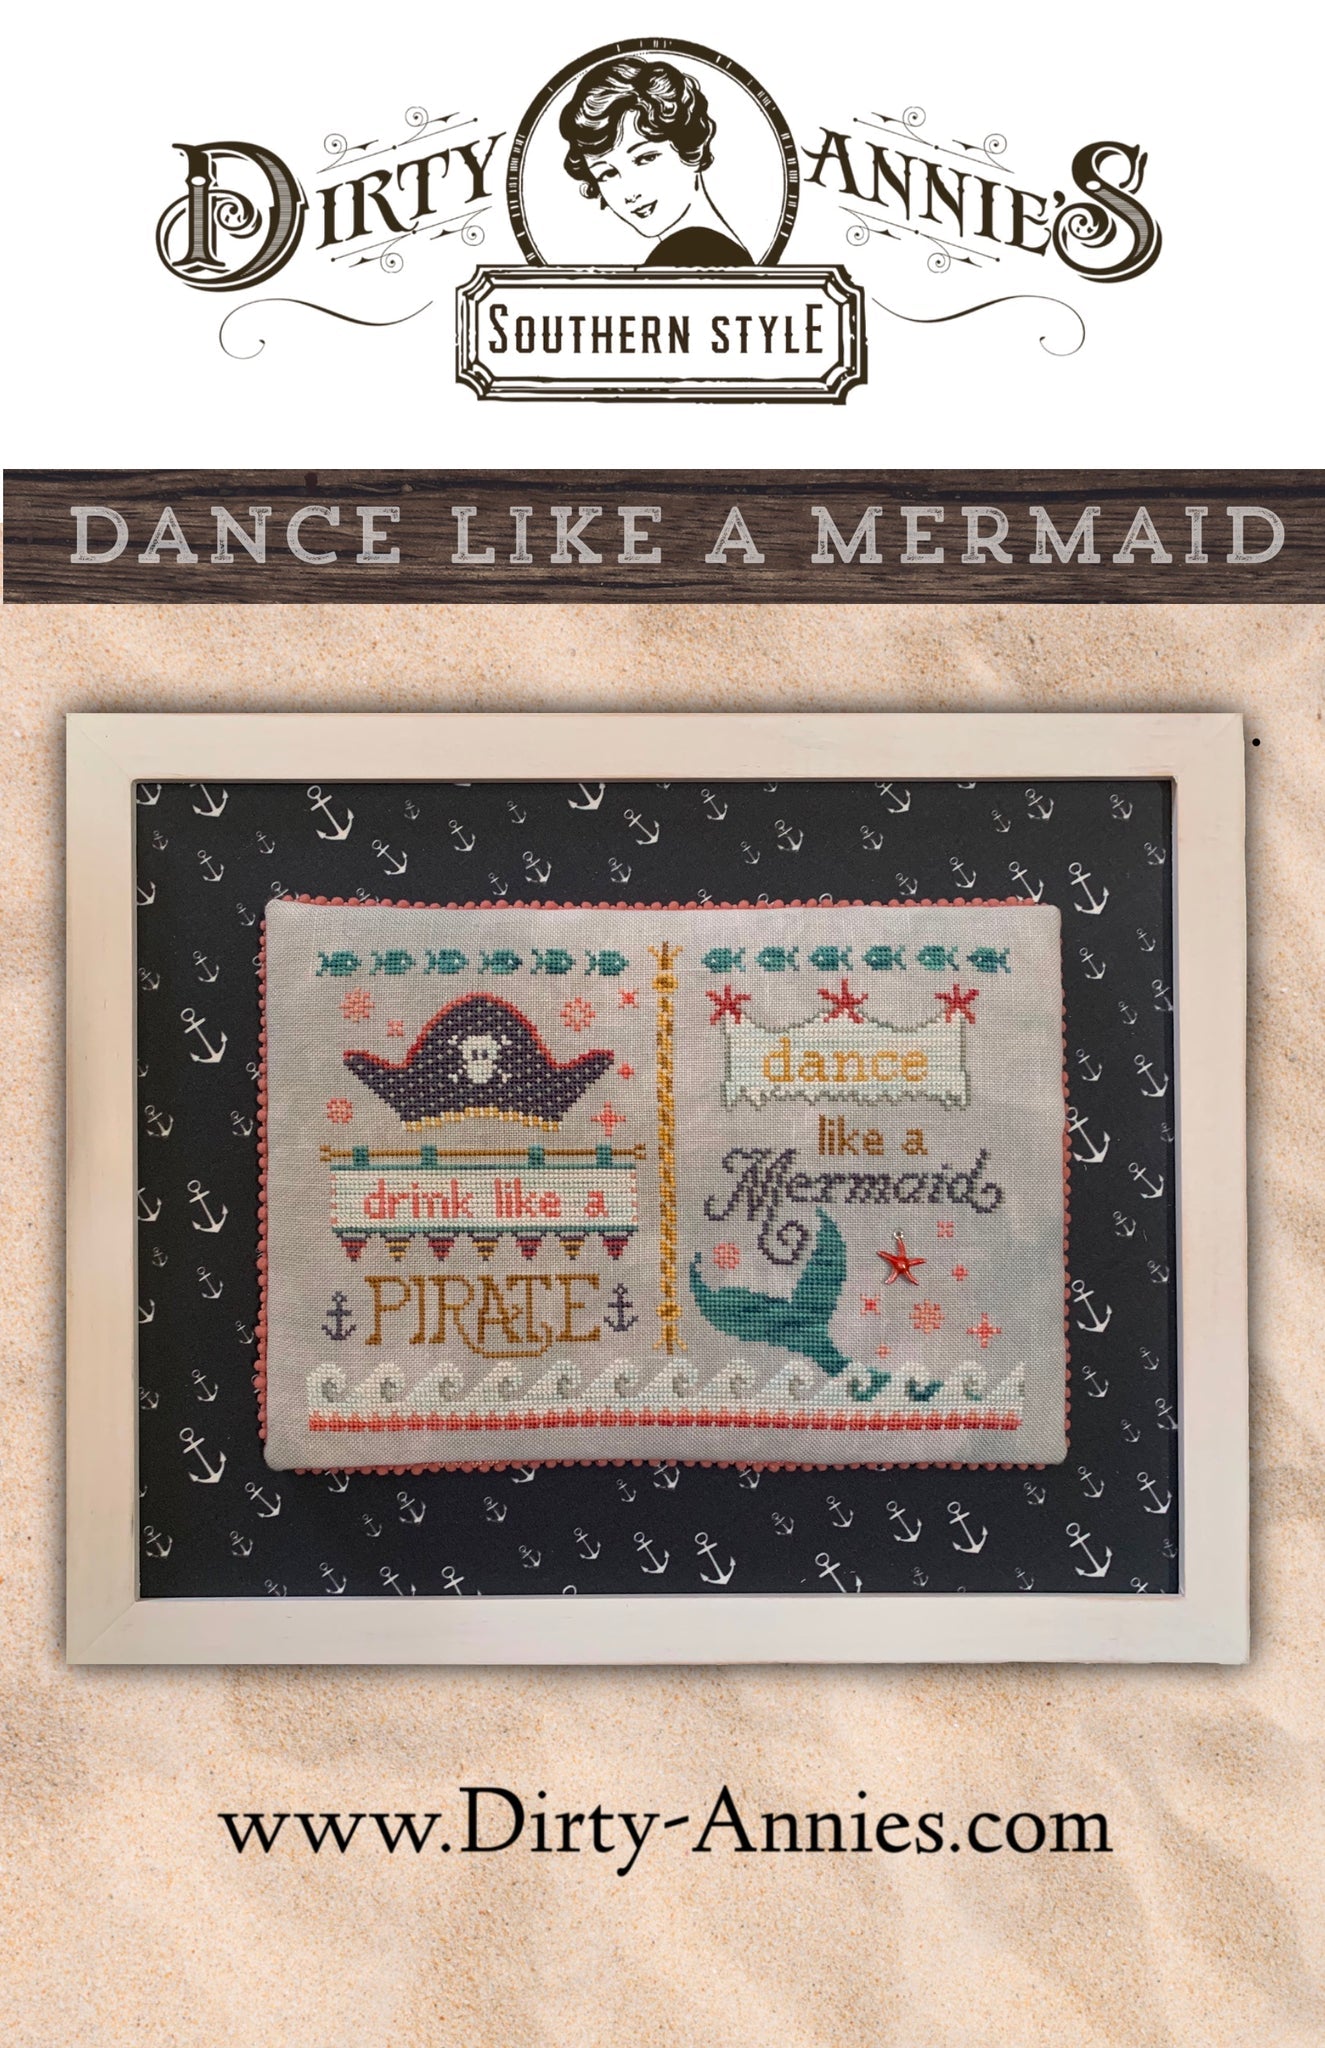 Dance Like a Mermaid (Charm included!) | Dirty Annie's Southern Style